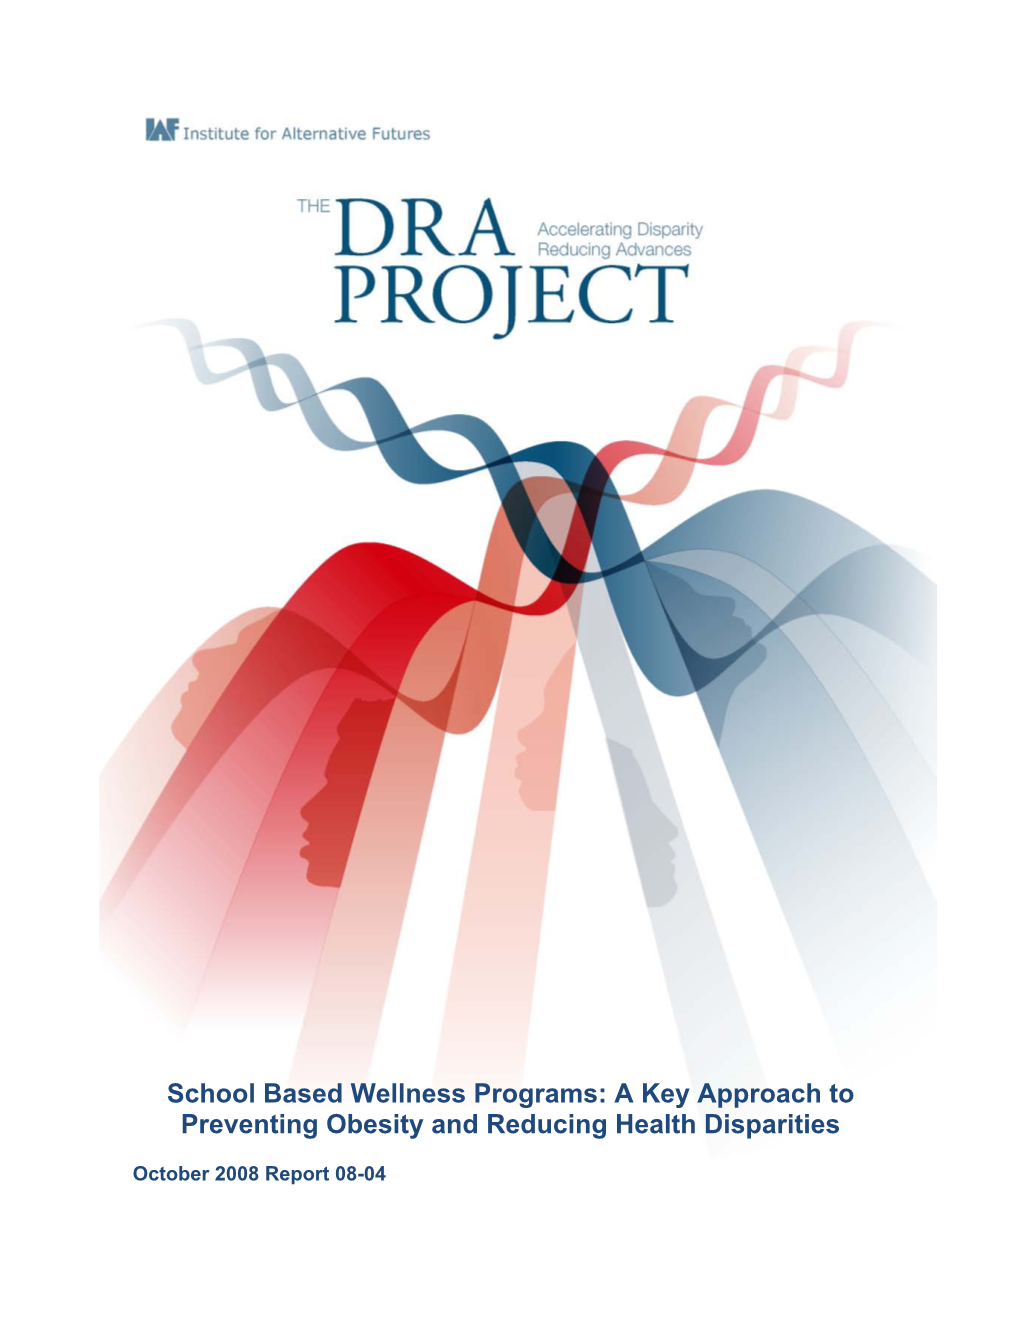 A Key Approach to Preventing Obesity and Reducing Health Disparities